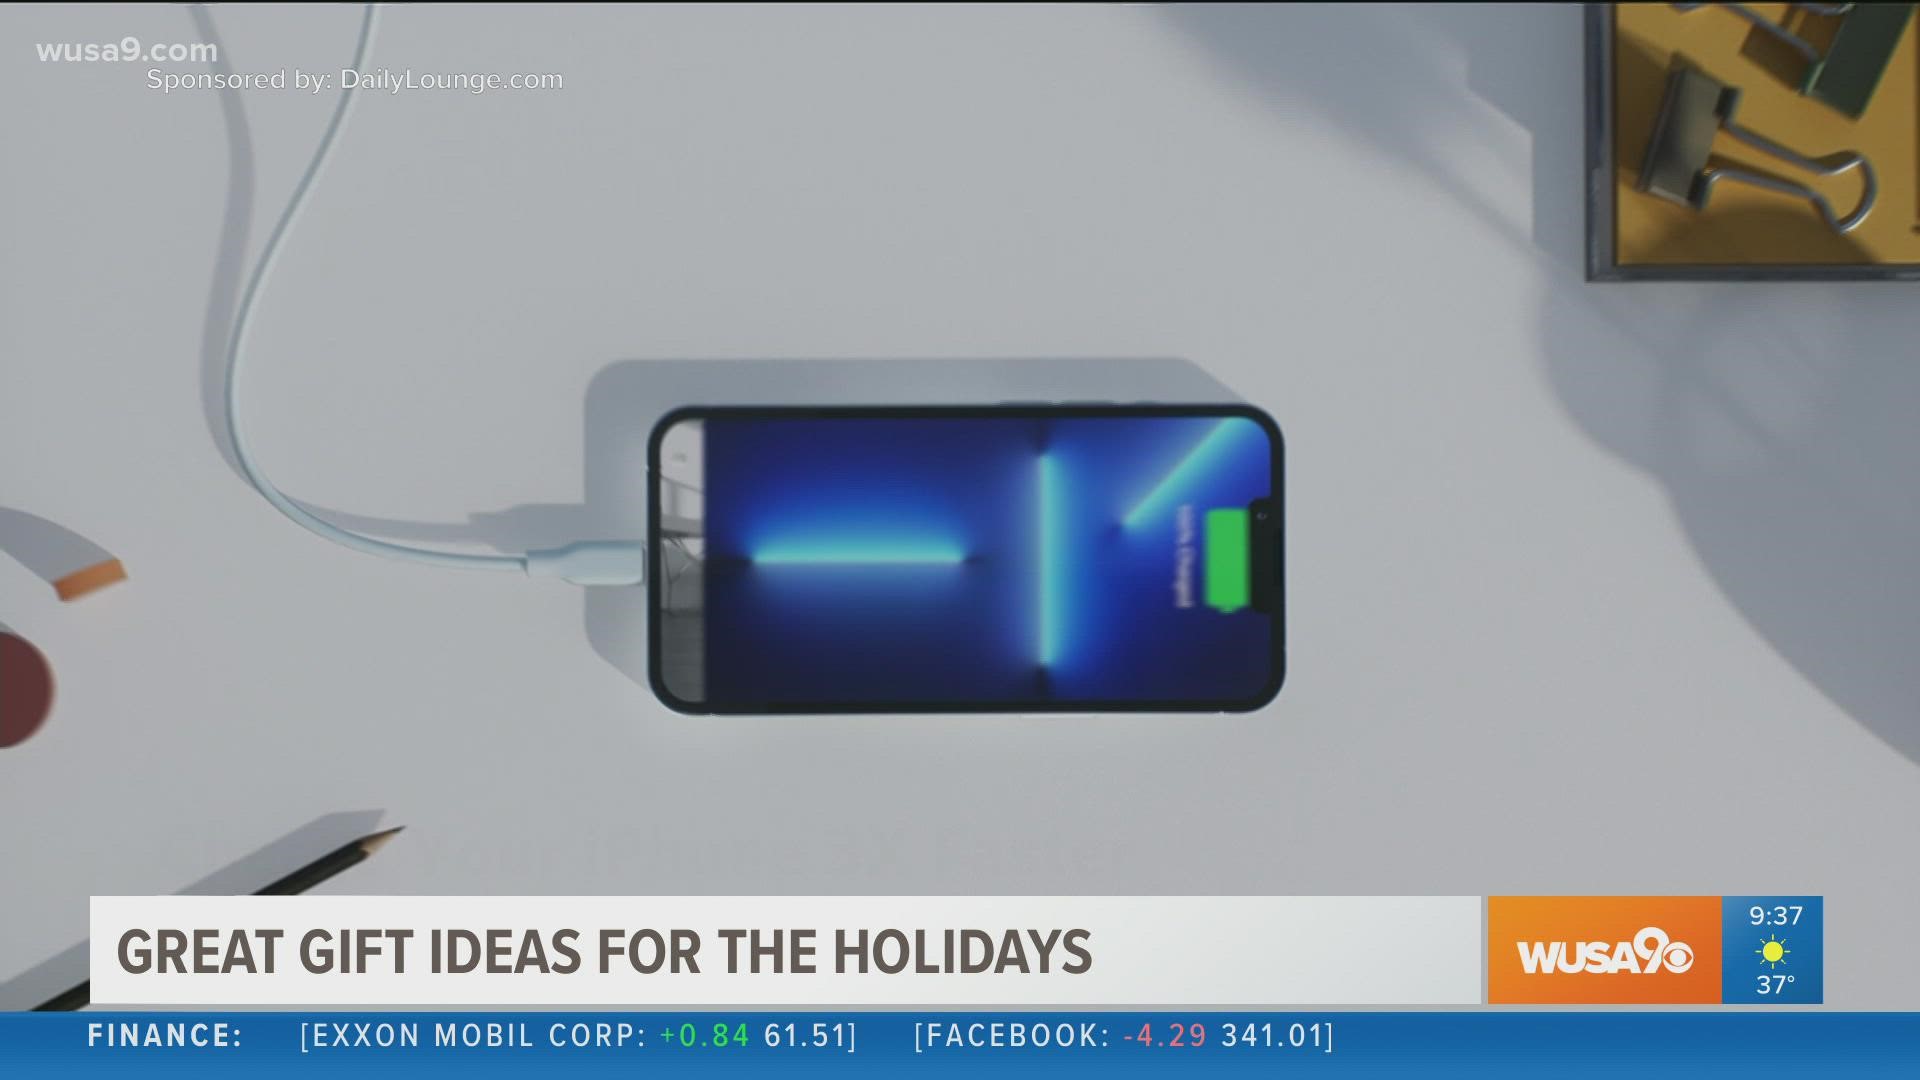 Sponsored by: DailyLouge.com. Bob Guiney shares all the greatest gift ideas he can find for the upcoming holiday season.